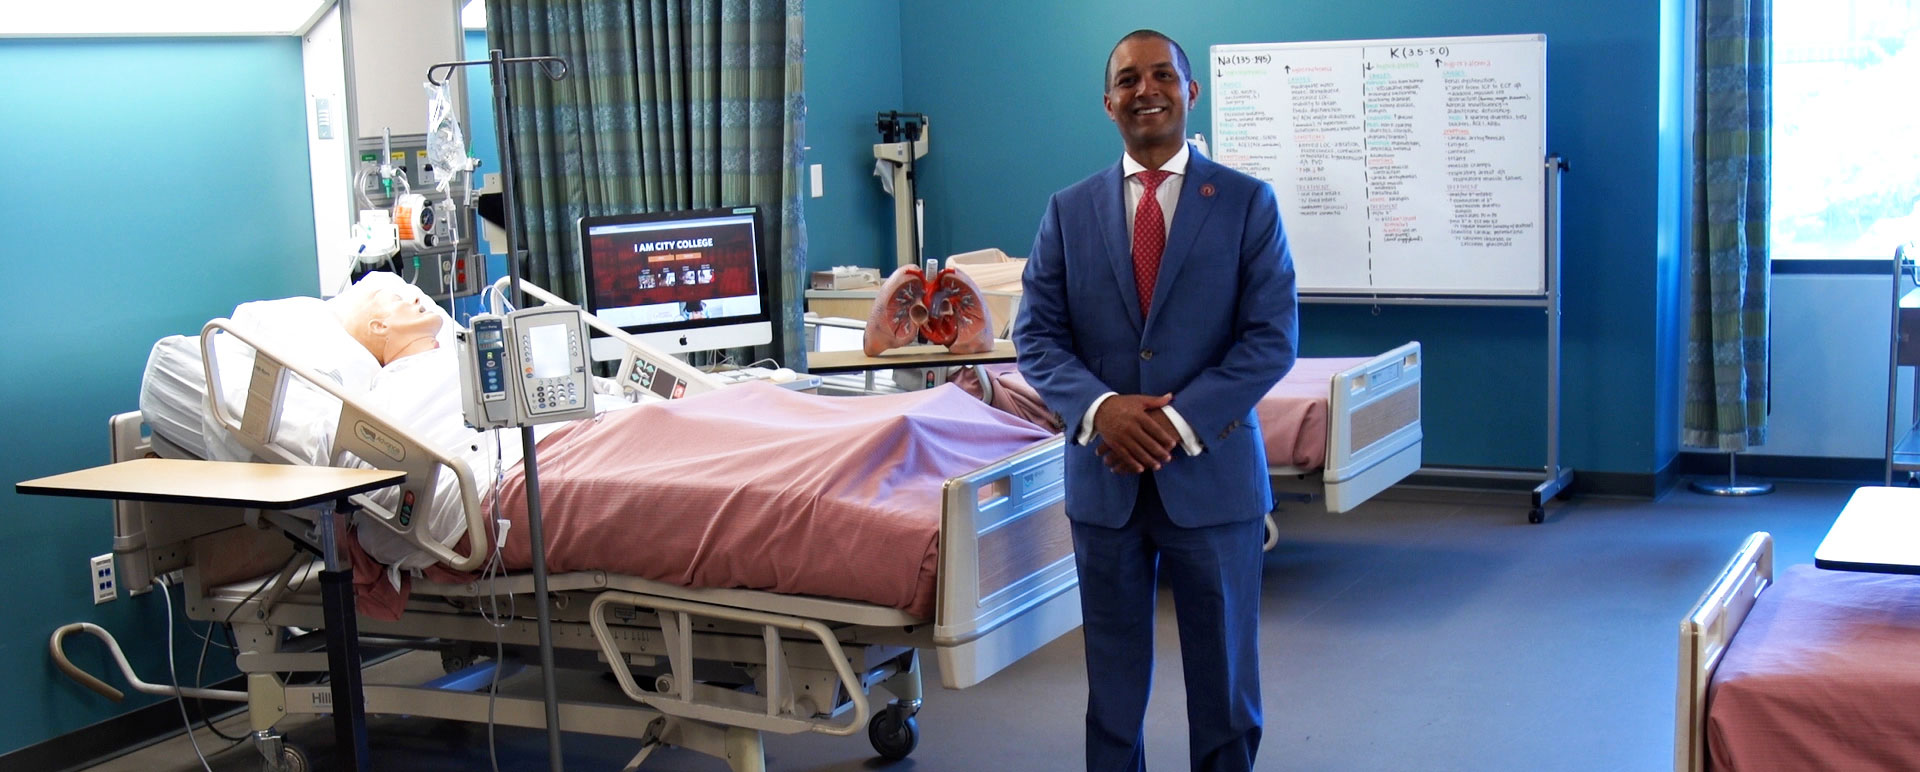 San Diego City College President Ricky Shabazz in a medical training room.